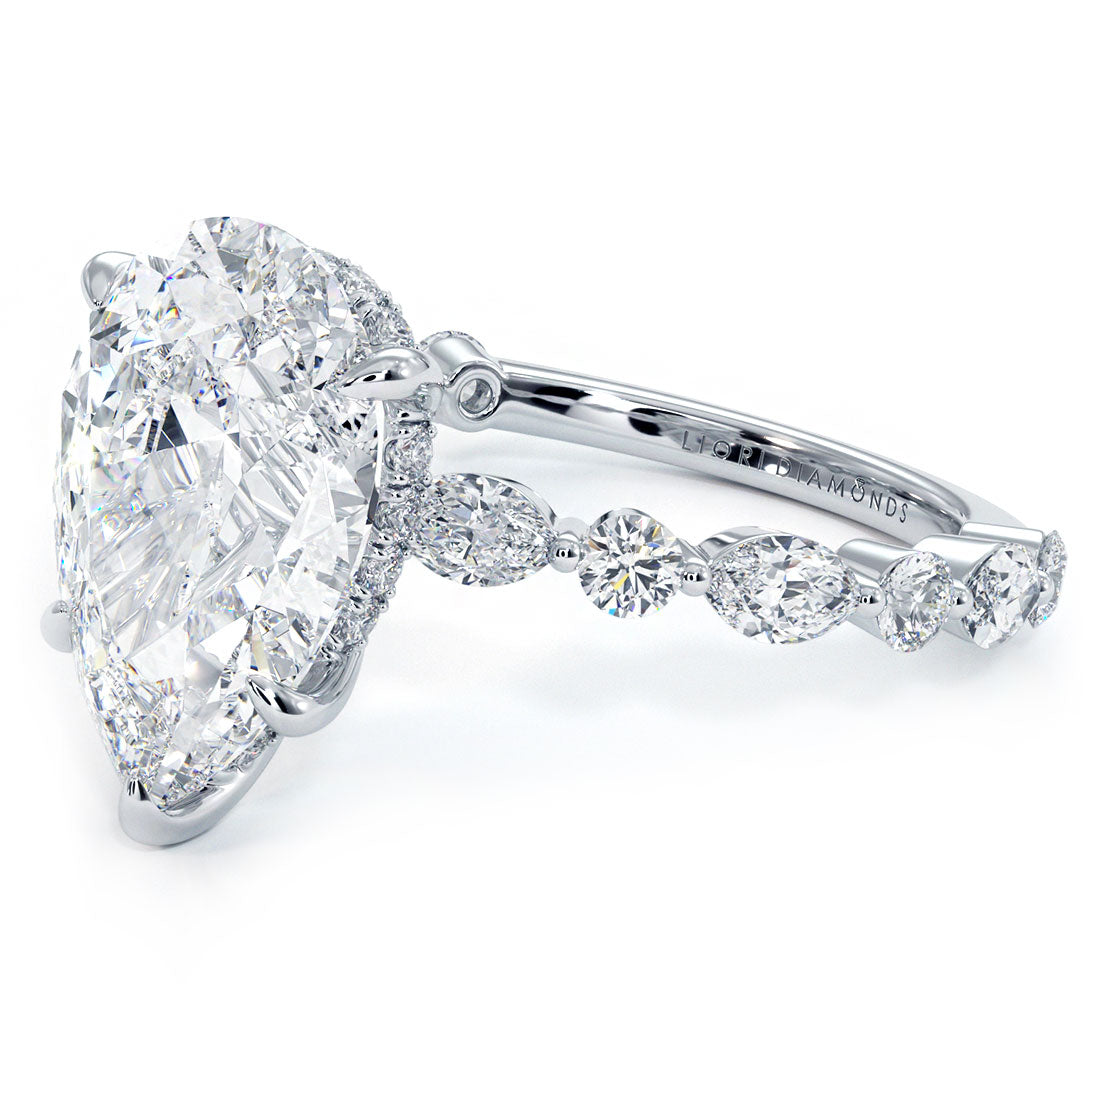 5.21ctw Pear Shape F-VS2 Alternating Round & Marquise Lab Grown Diamond Engagement Ring set in 14k White Gold